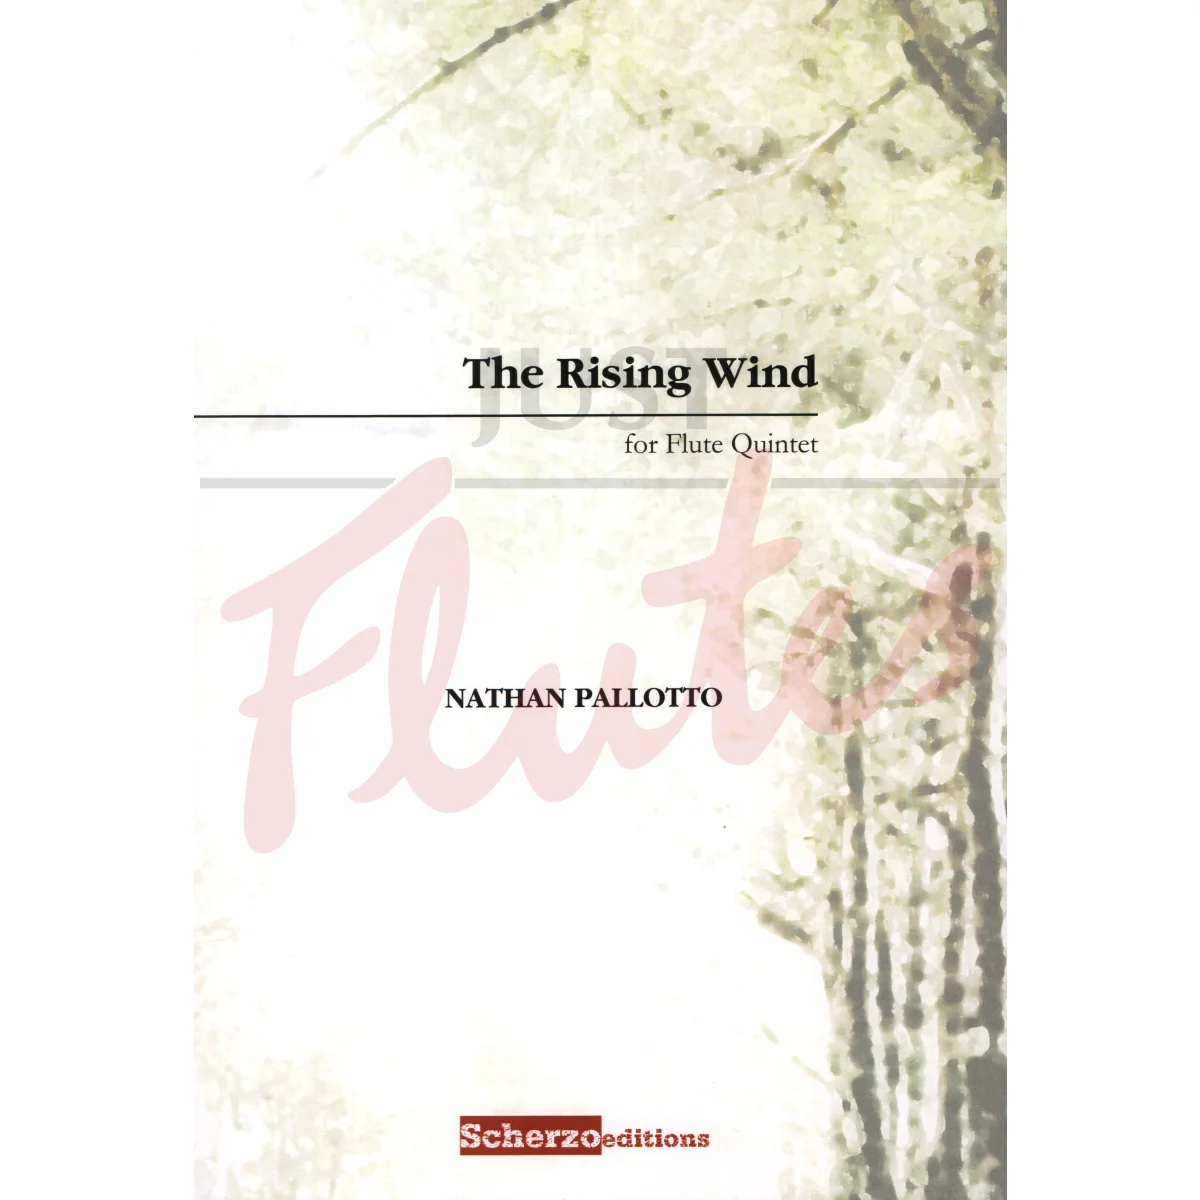 The Rising Wind for Flute Quintet